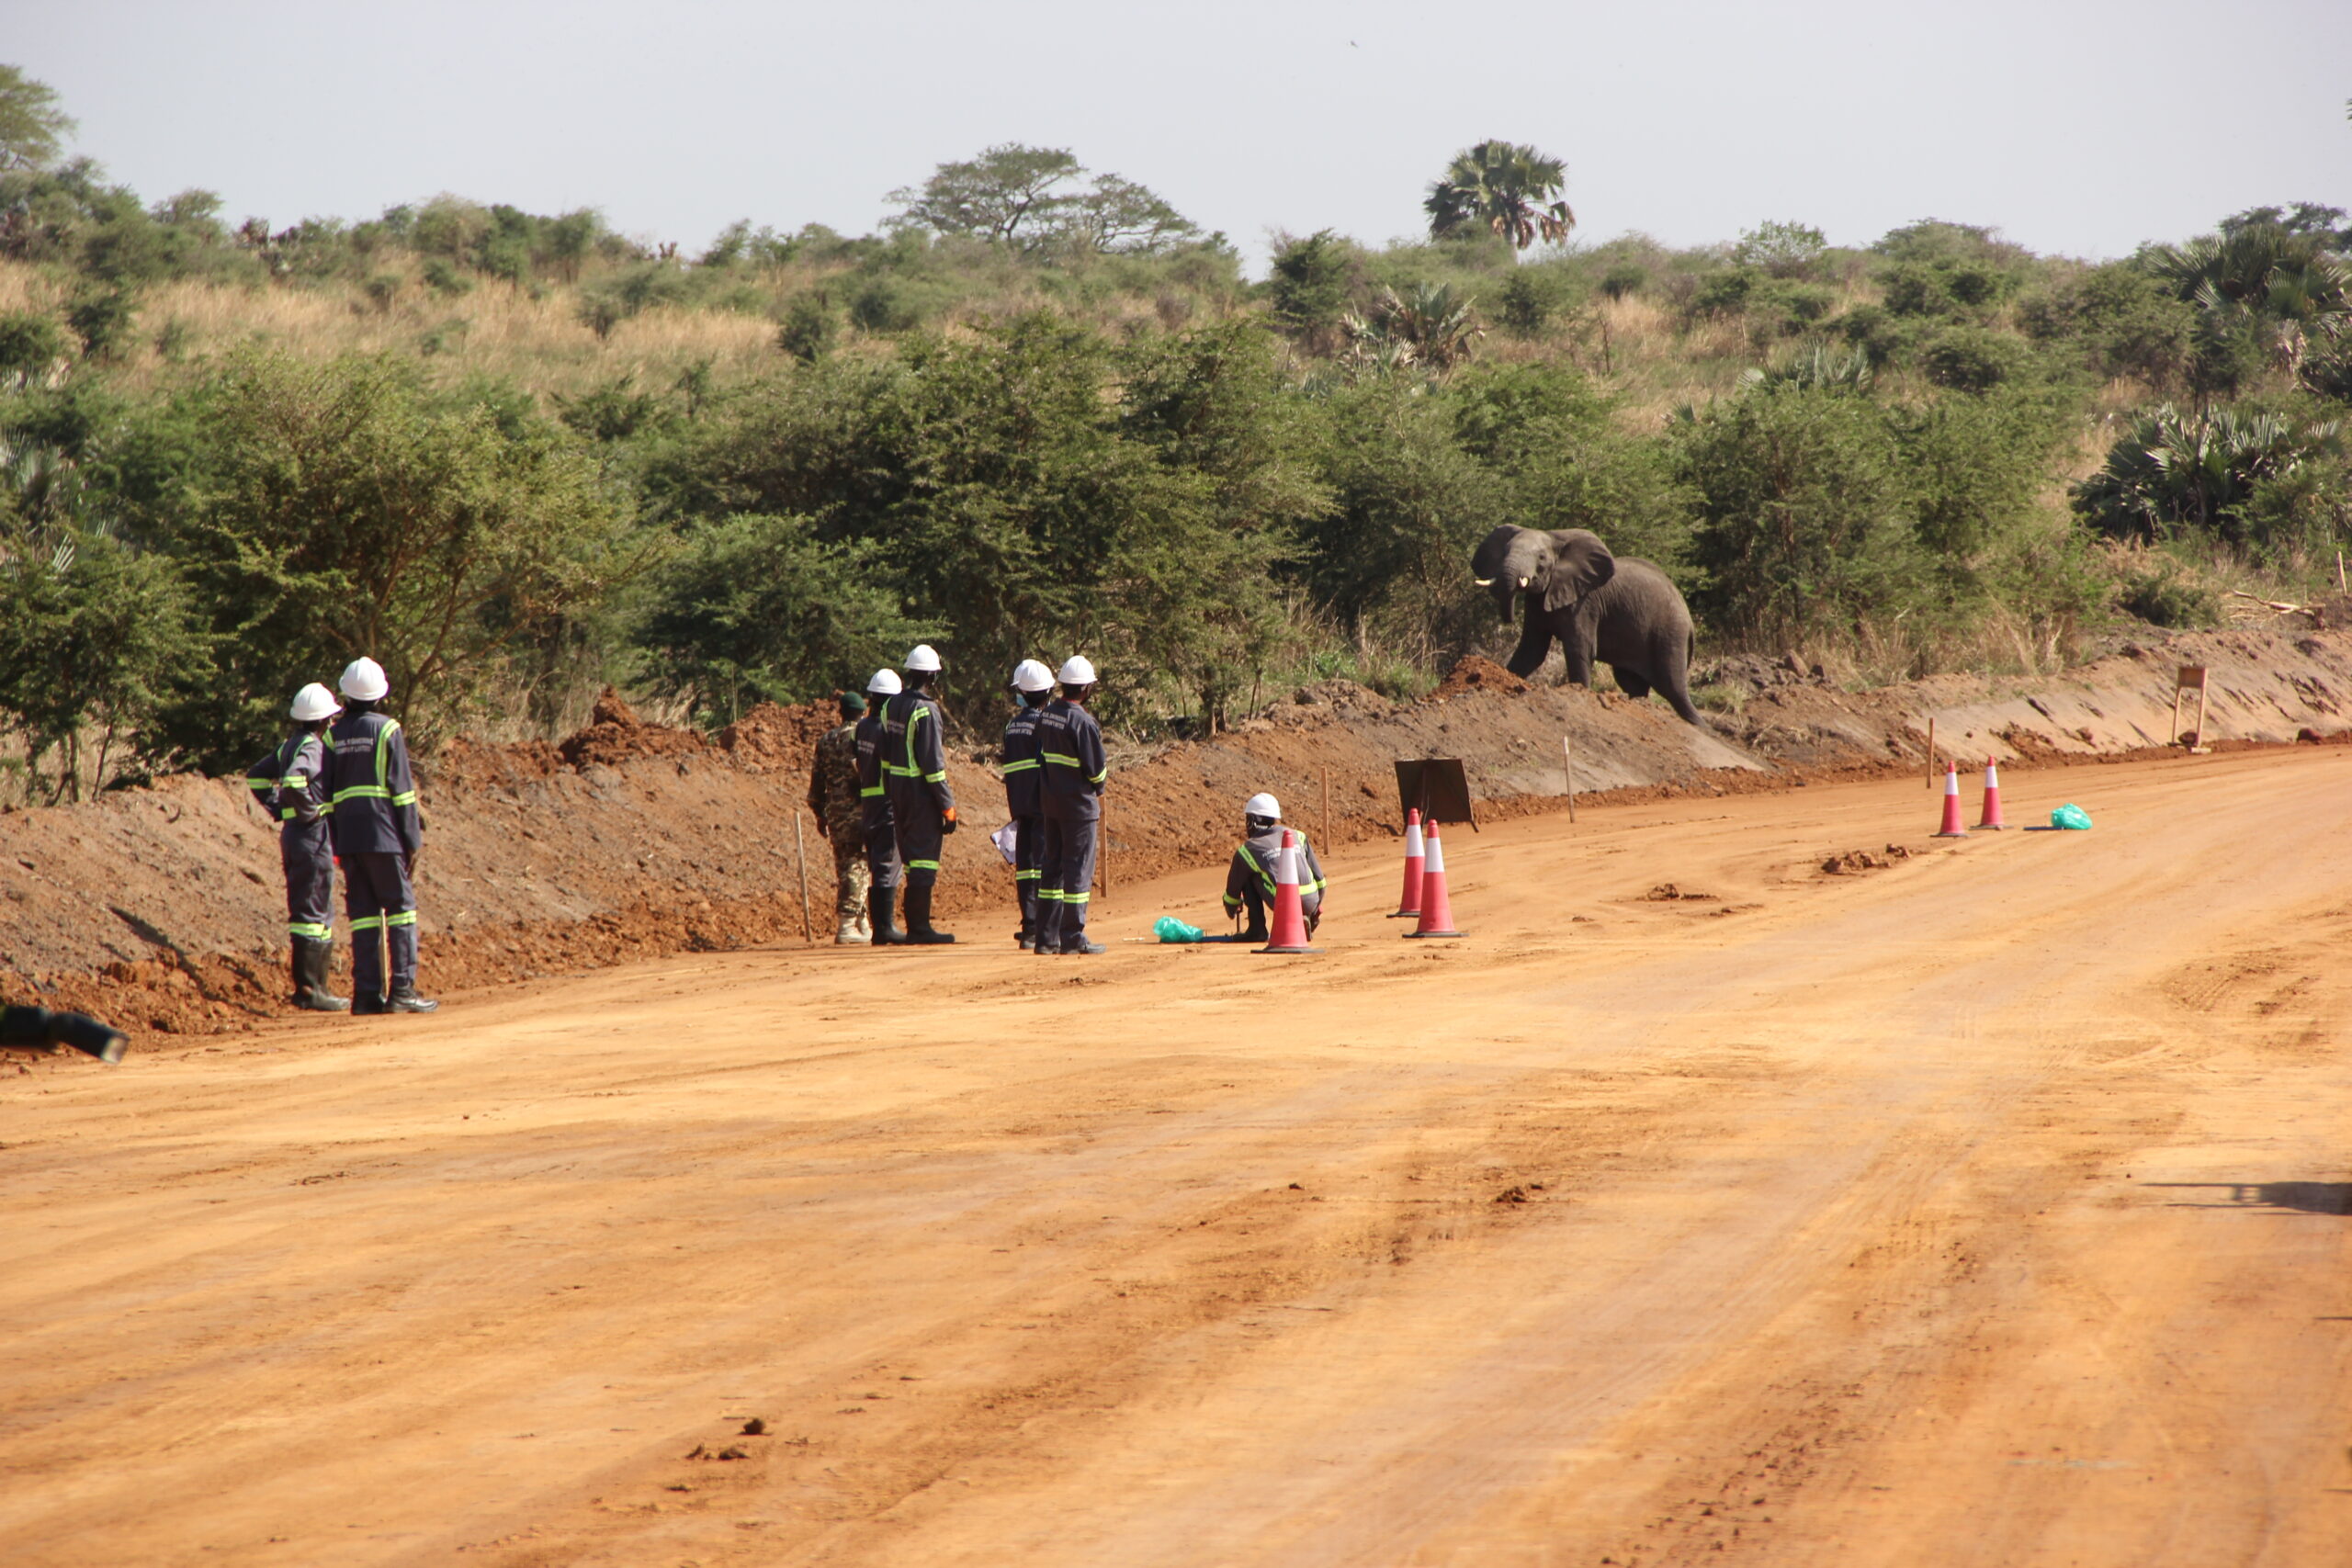 Road construction workers being interrupted by an elephant from Murchison Falls National Park along the Bugungu-Buliisa road in Buliisa district in May, 2022. Photo: Robert Atuhairwe.